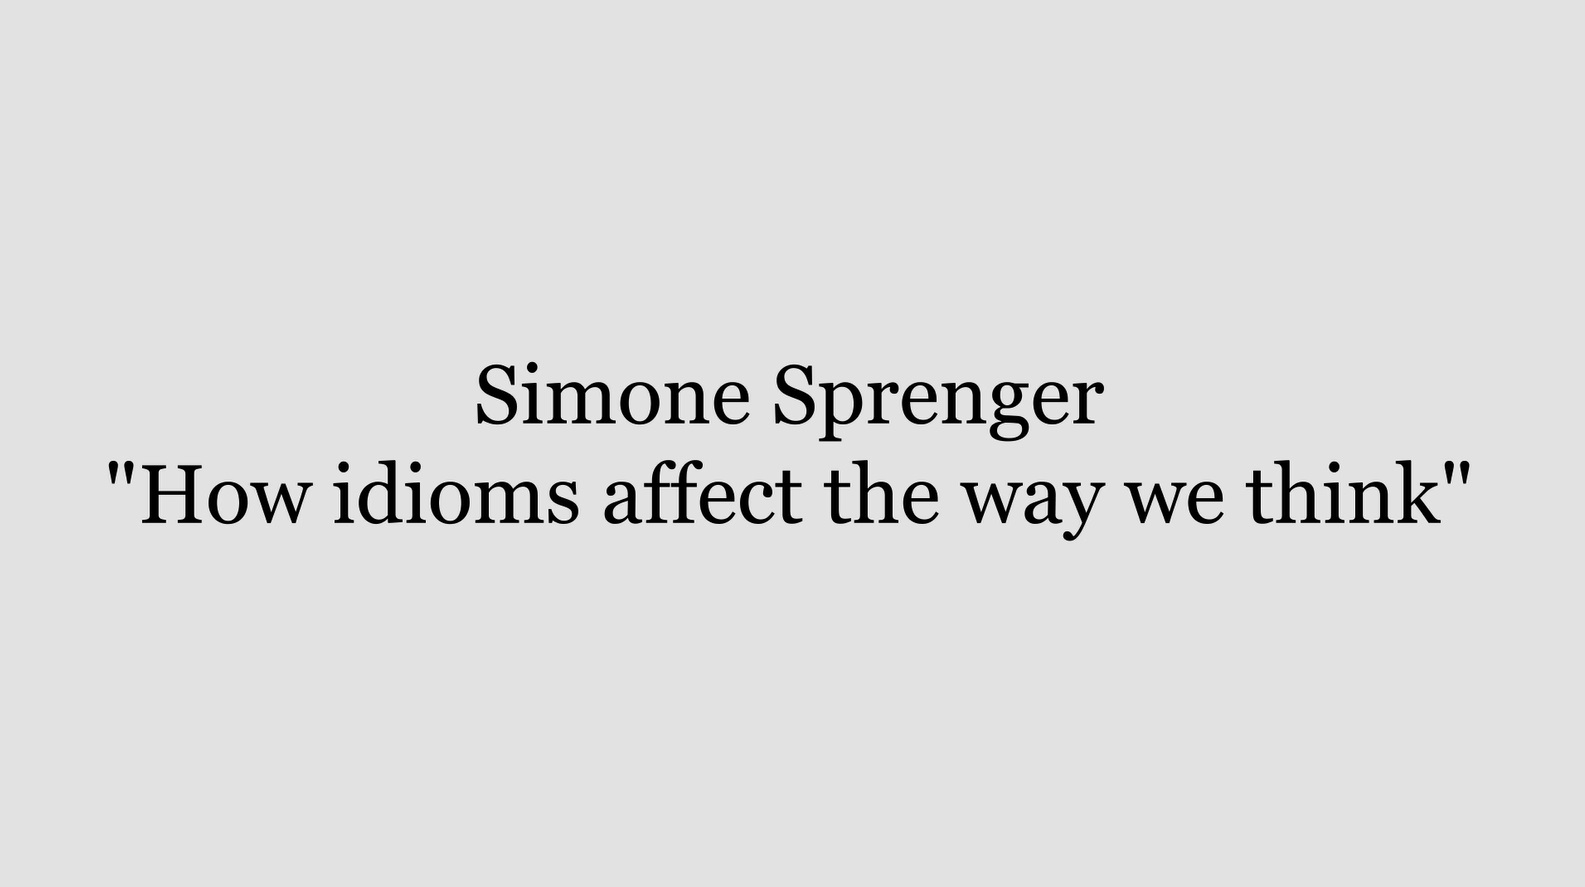 How idioms affect the way we think by Simone Sprenger